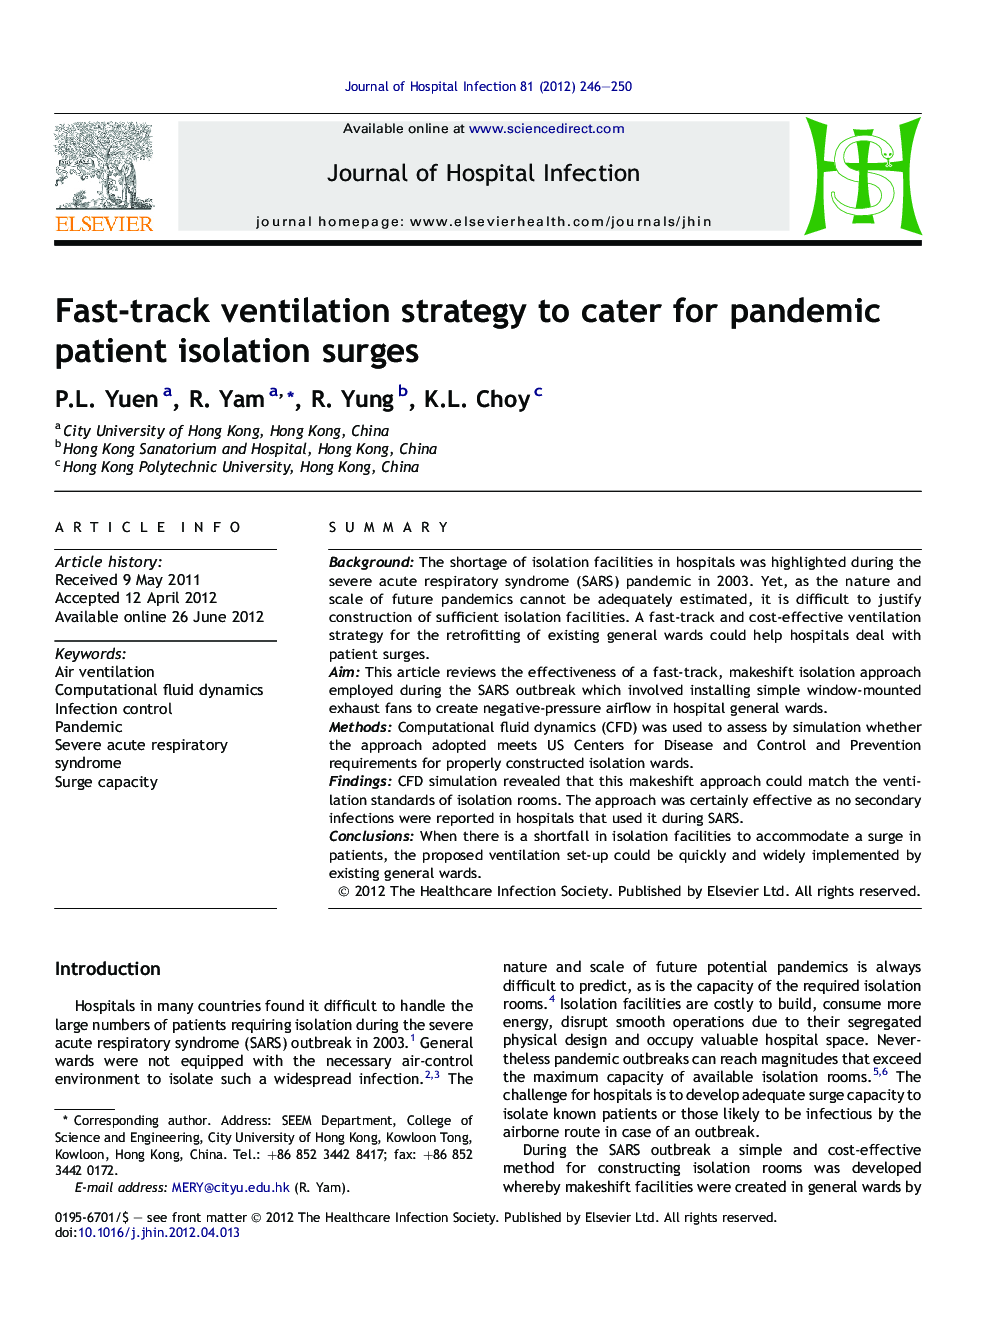 Fast-track ventilation strategy to cater for pandemic patient isolation surges